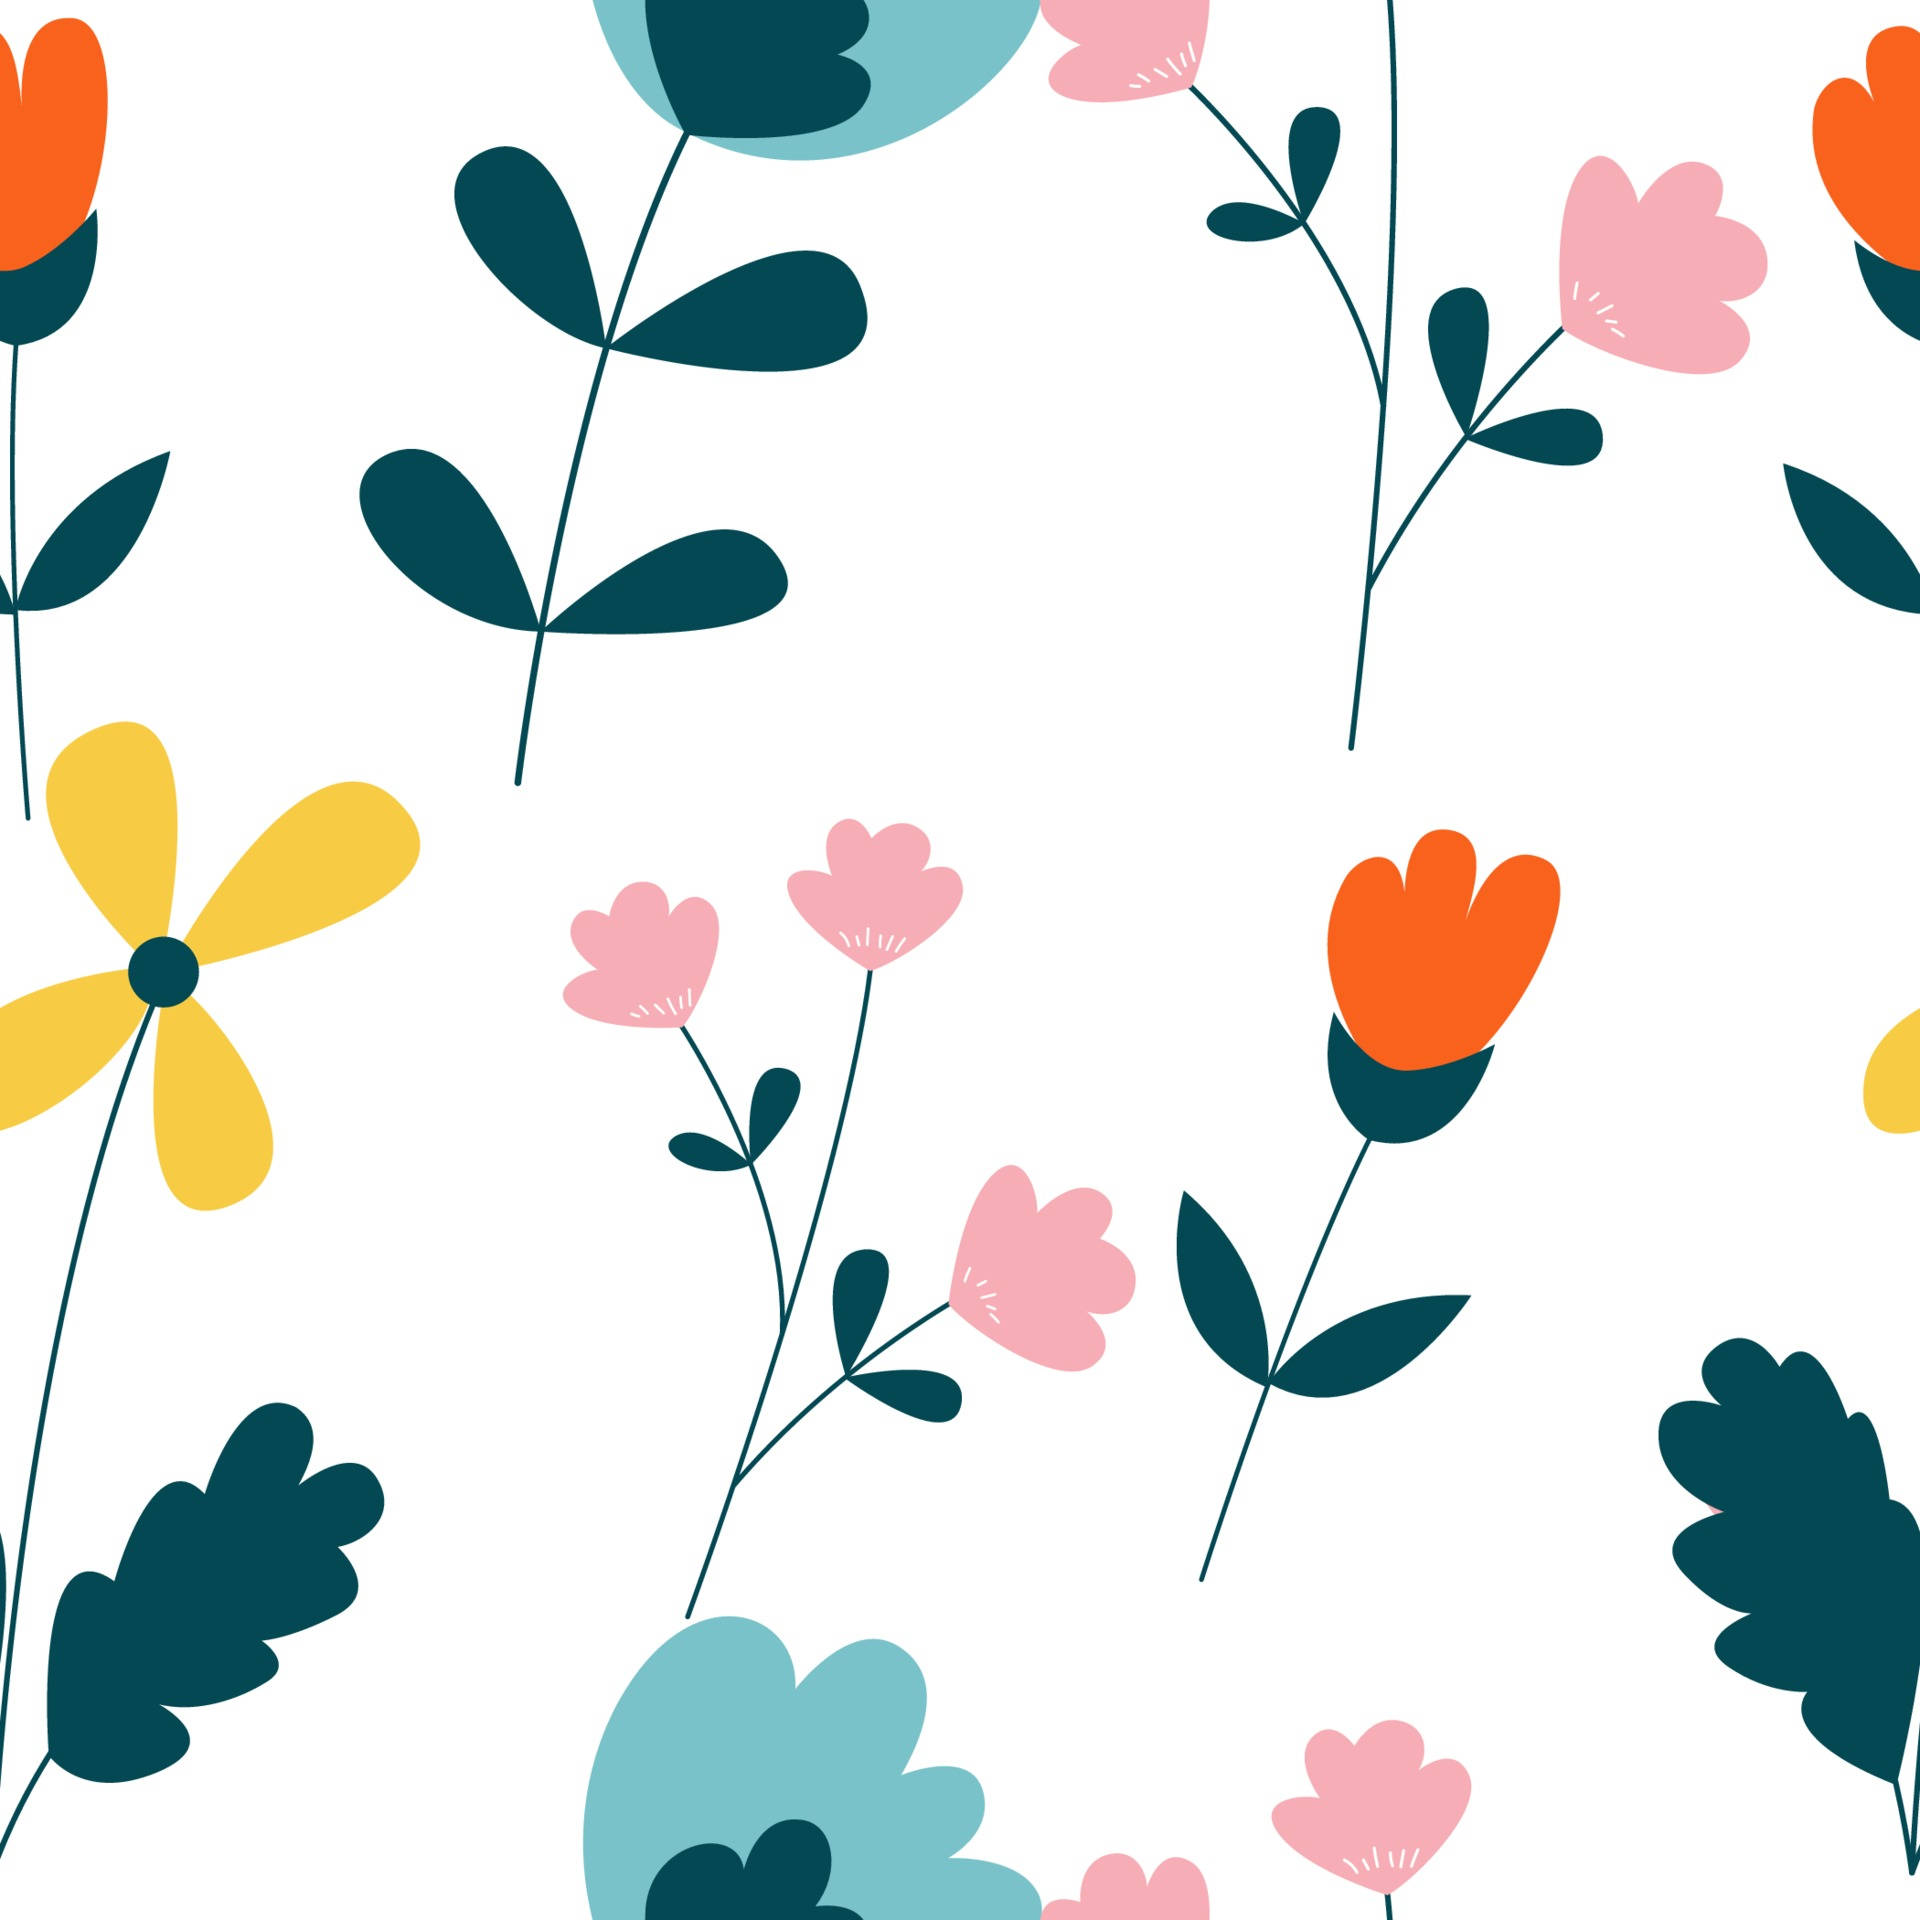 Download Flower Design Stylized Colorful Flowers Wallpaper | Wallpapers.com